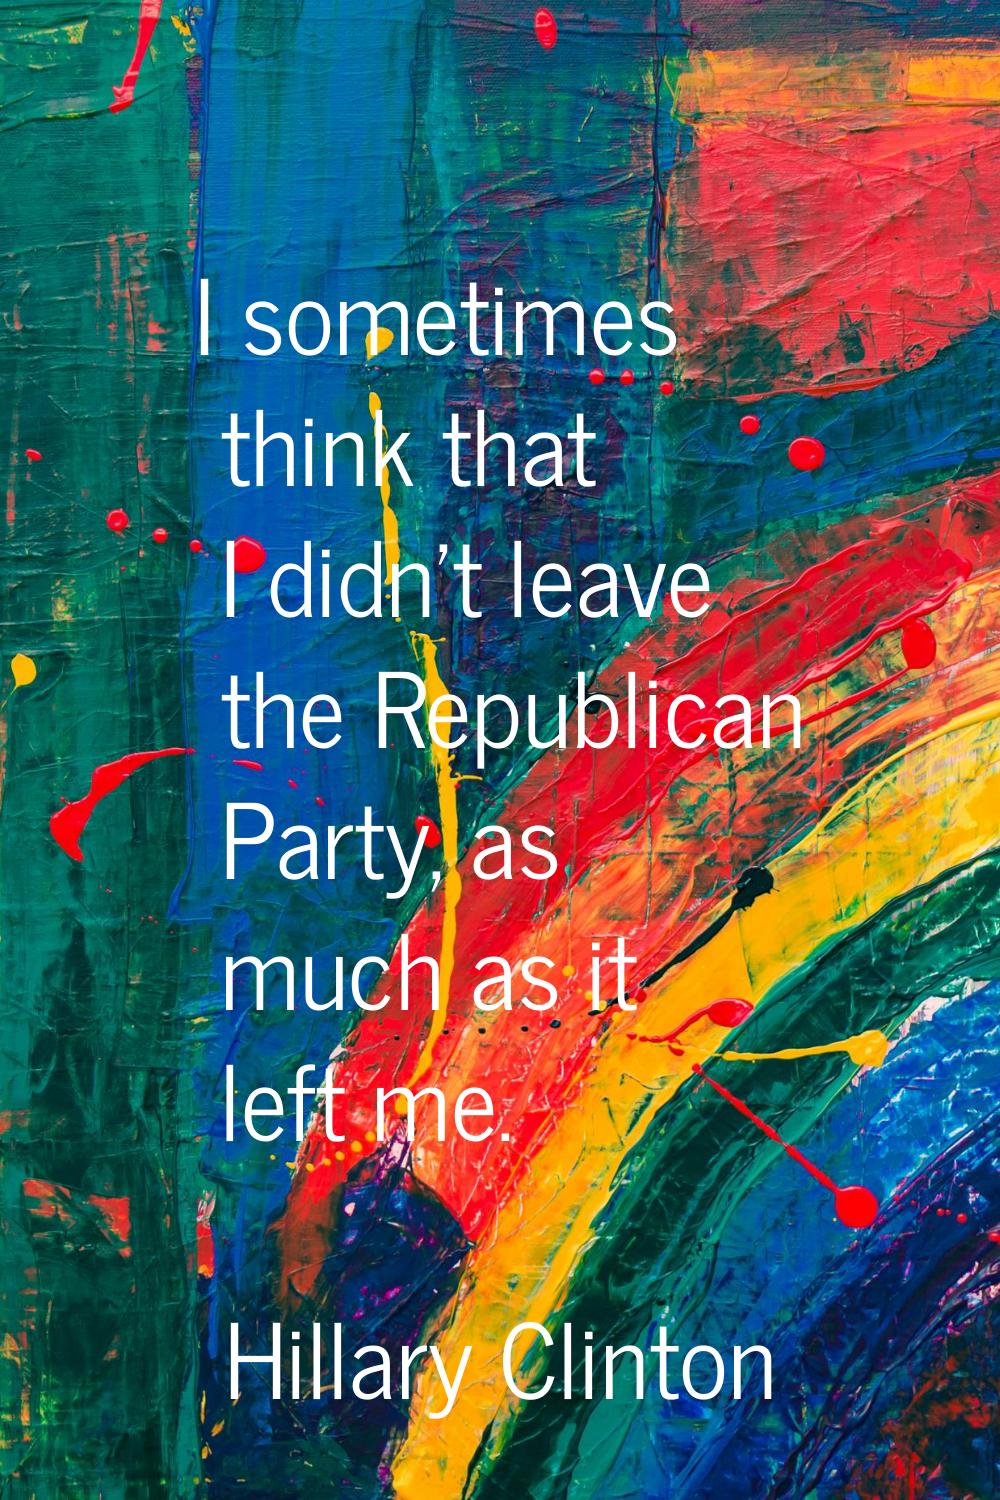 I sometimes think that I didn't leave the Republican Party, as much as it left me.